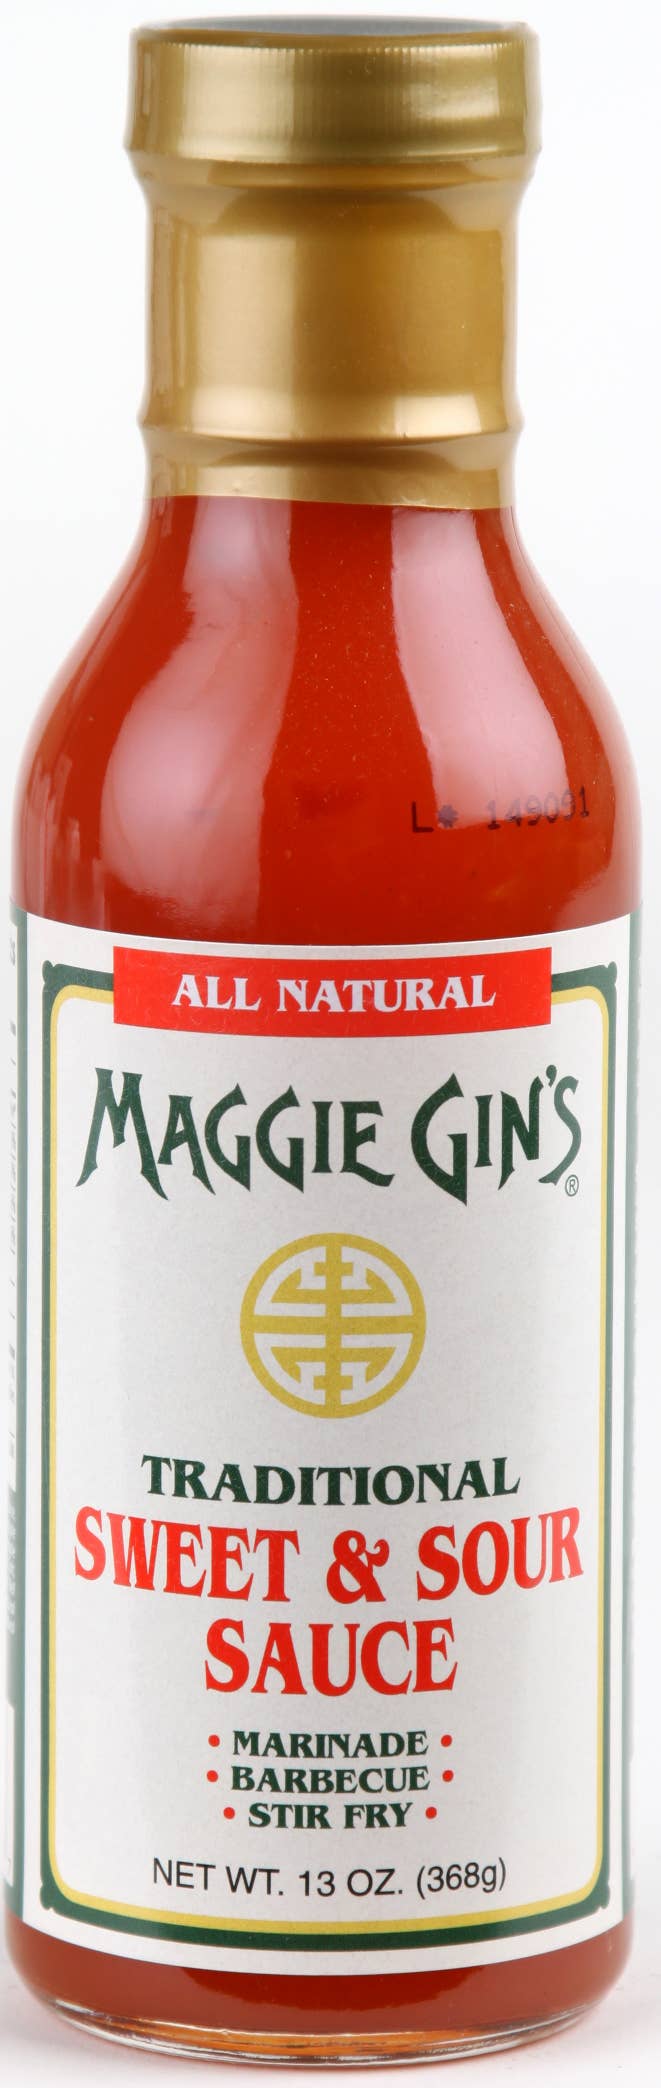 Maggie Gins Sweet and Sour Sauce - NashvilleSpiceCompany